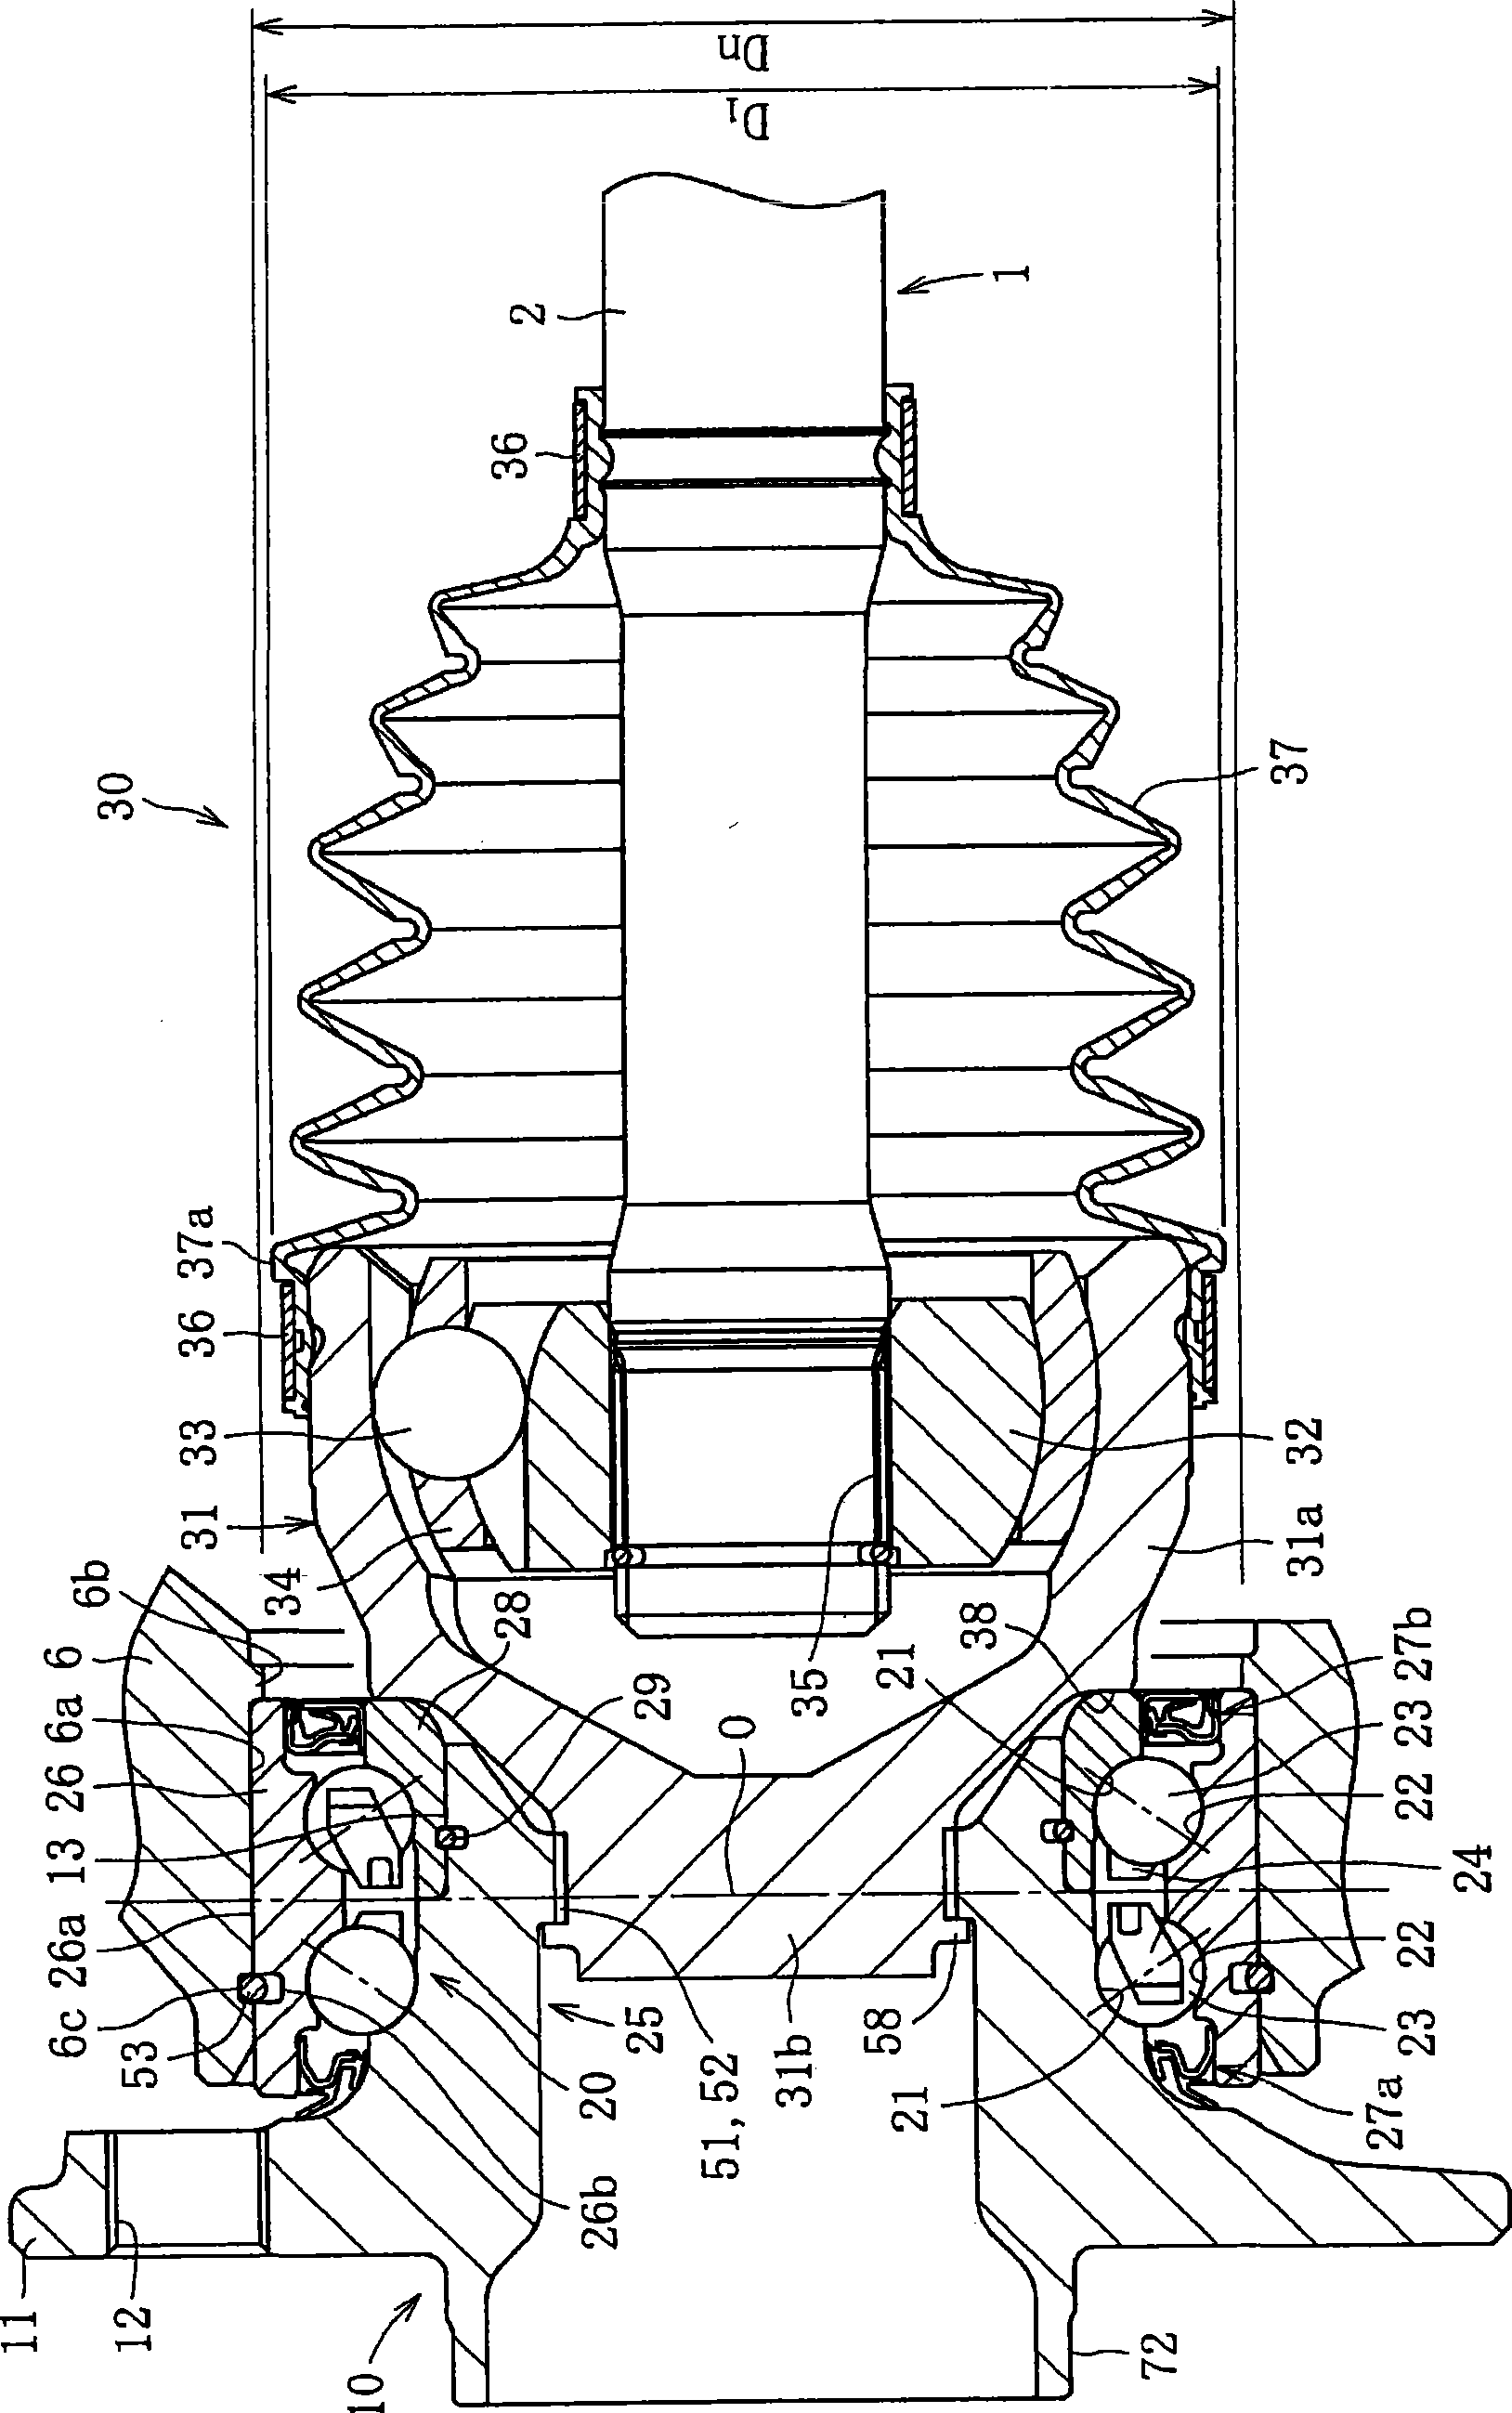 Bearing unit for driving wheels